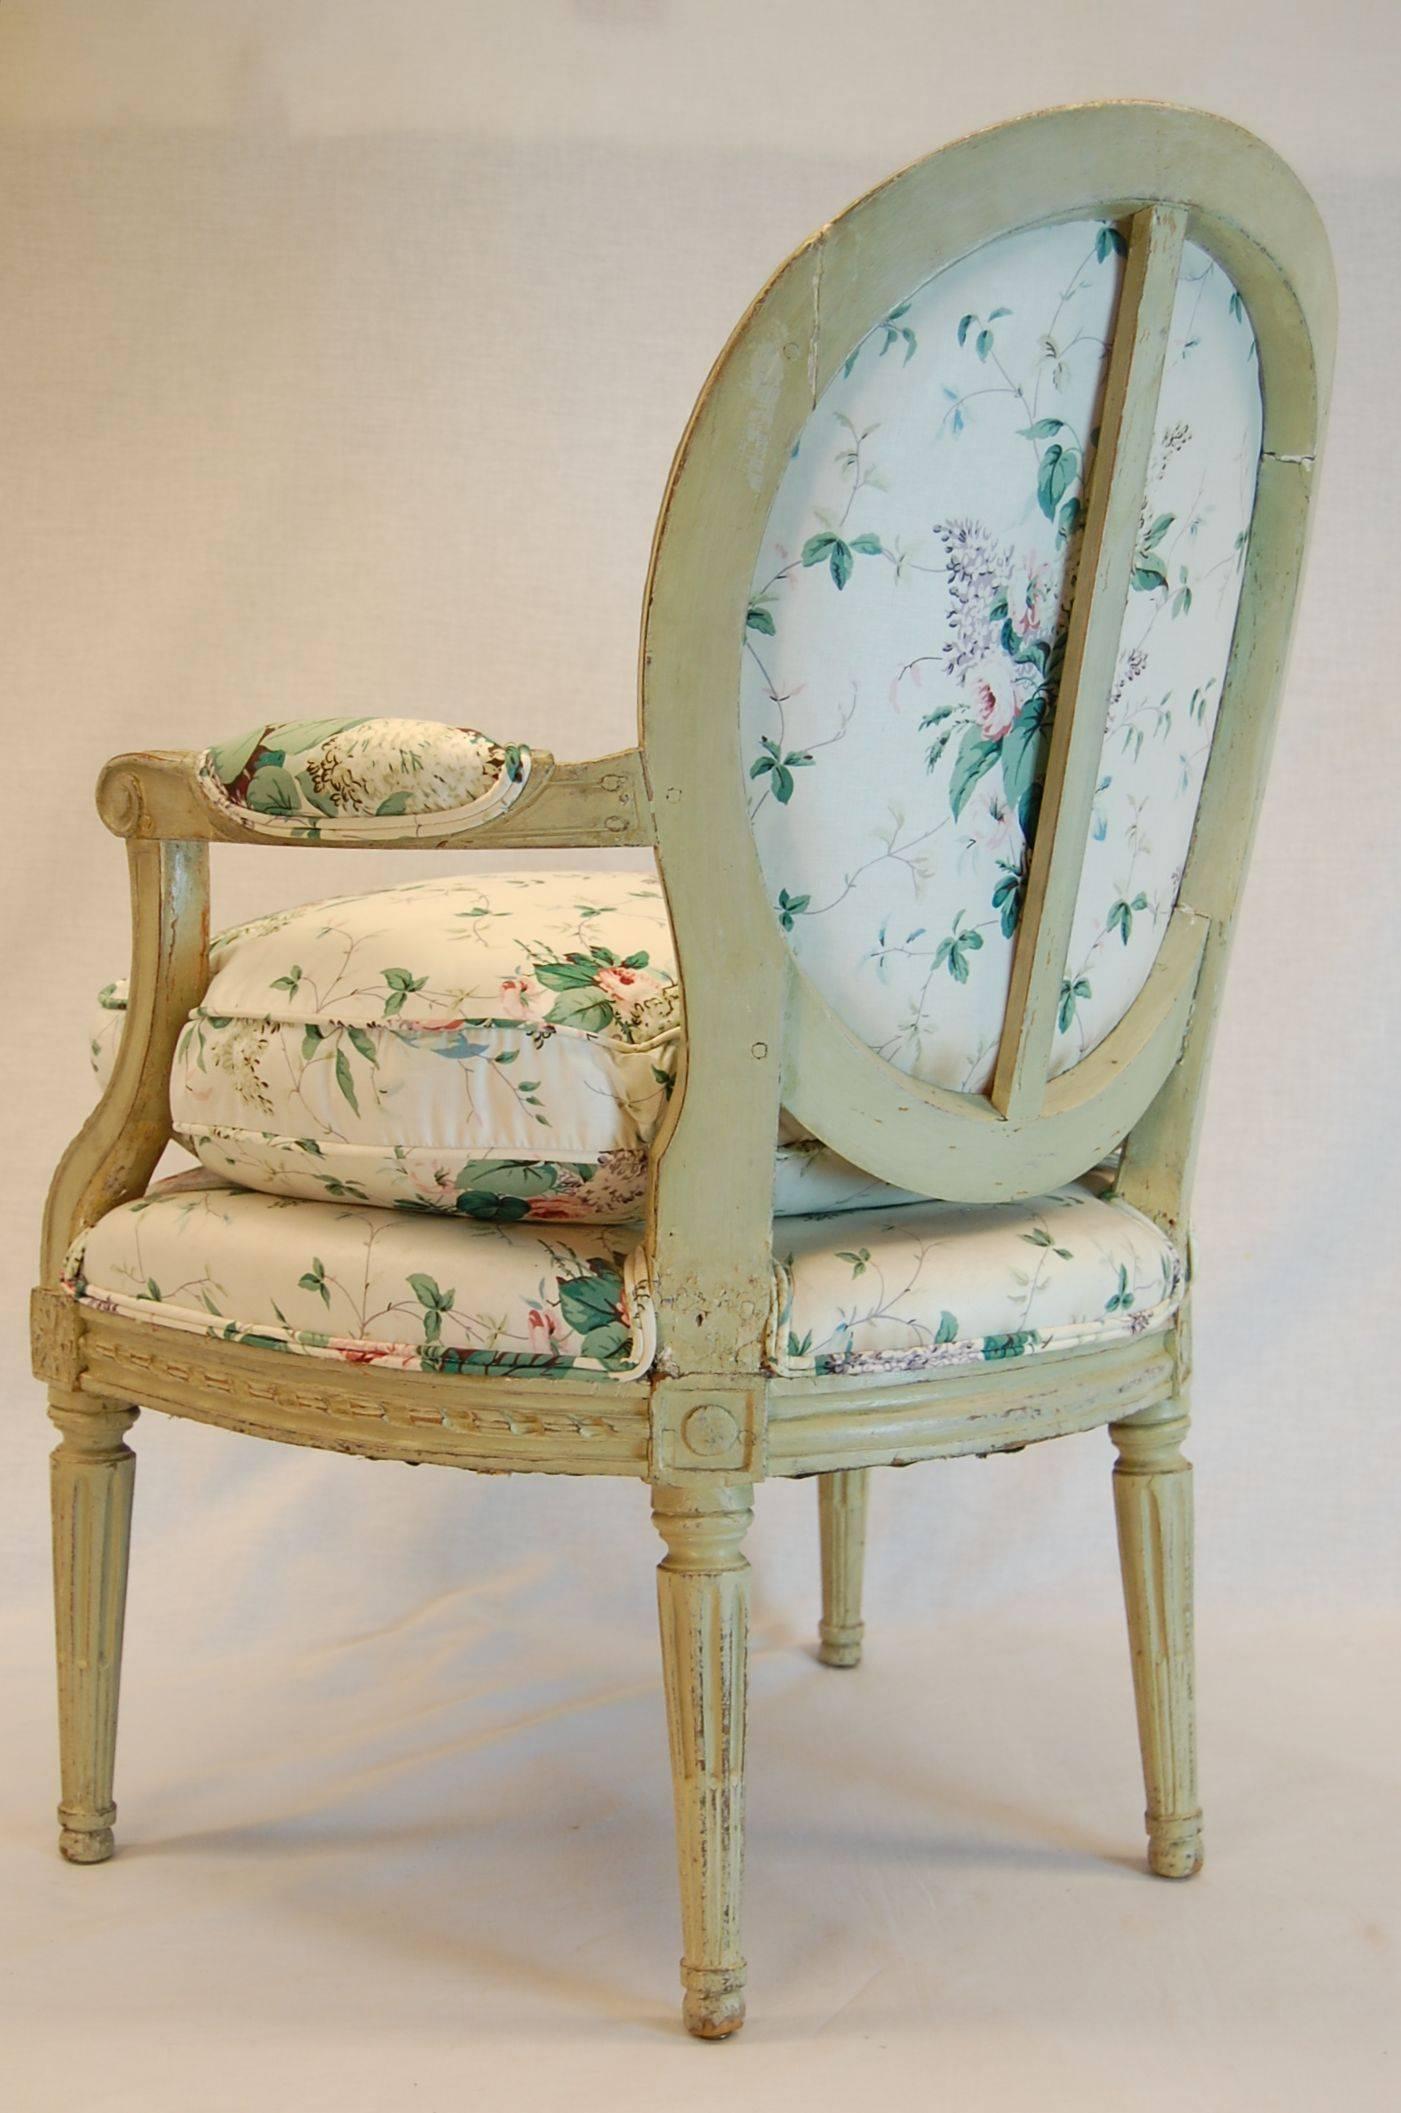 Hand-Carved Louis XVI Carved Wood Fauteuil in Green Painted Finish, circa 1800